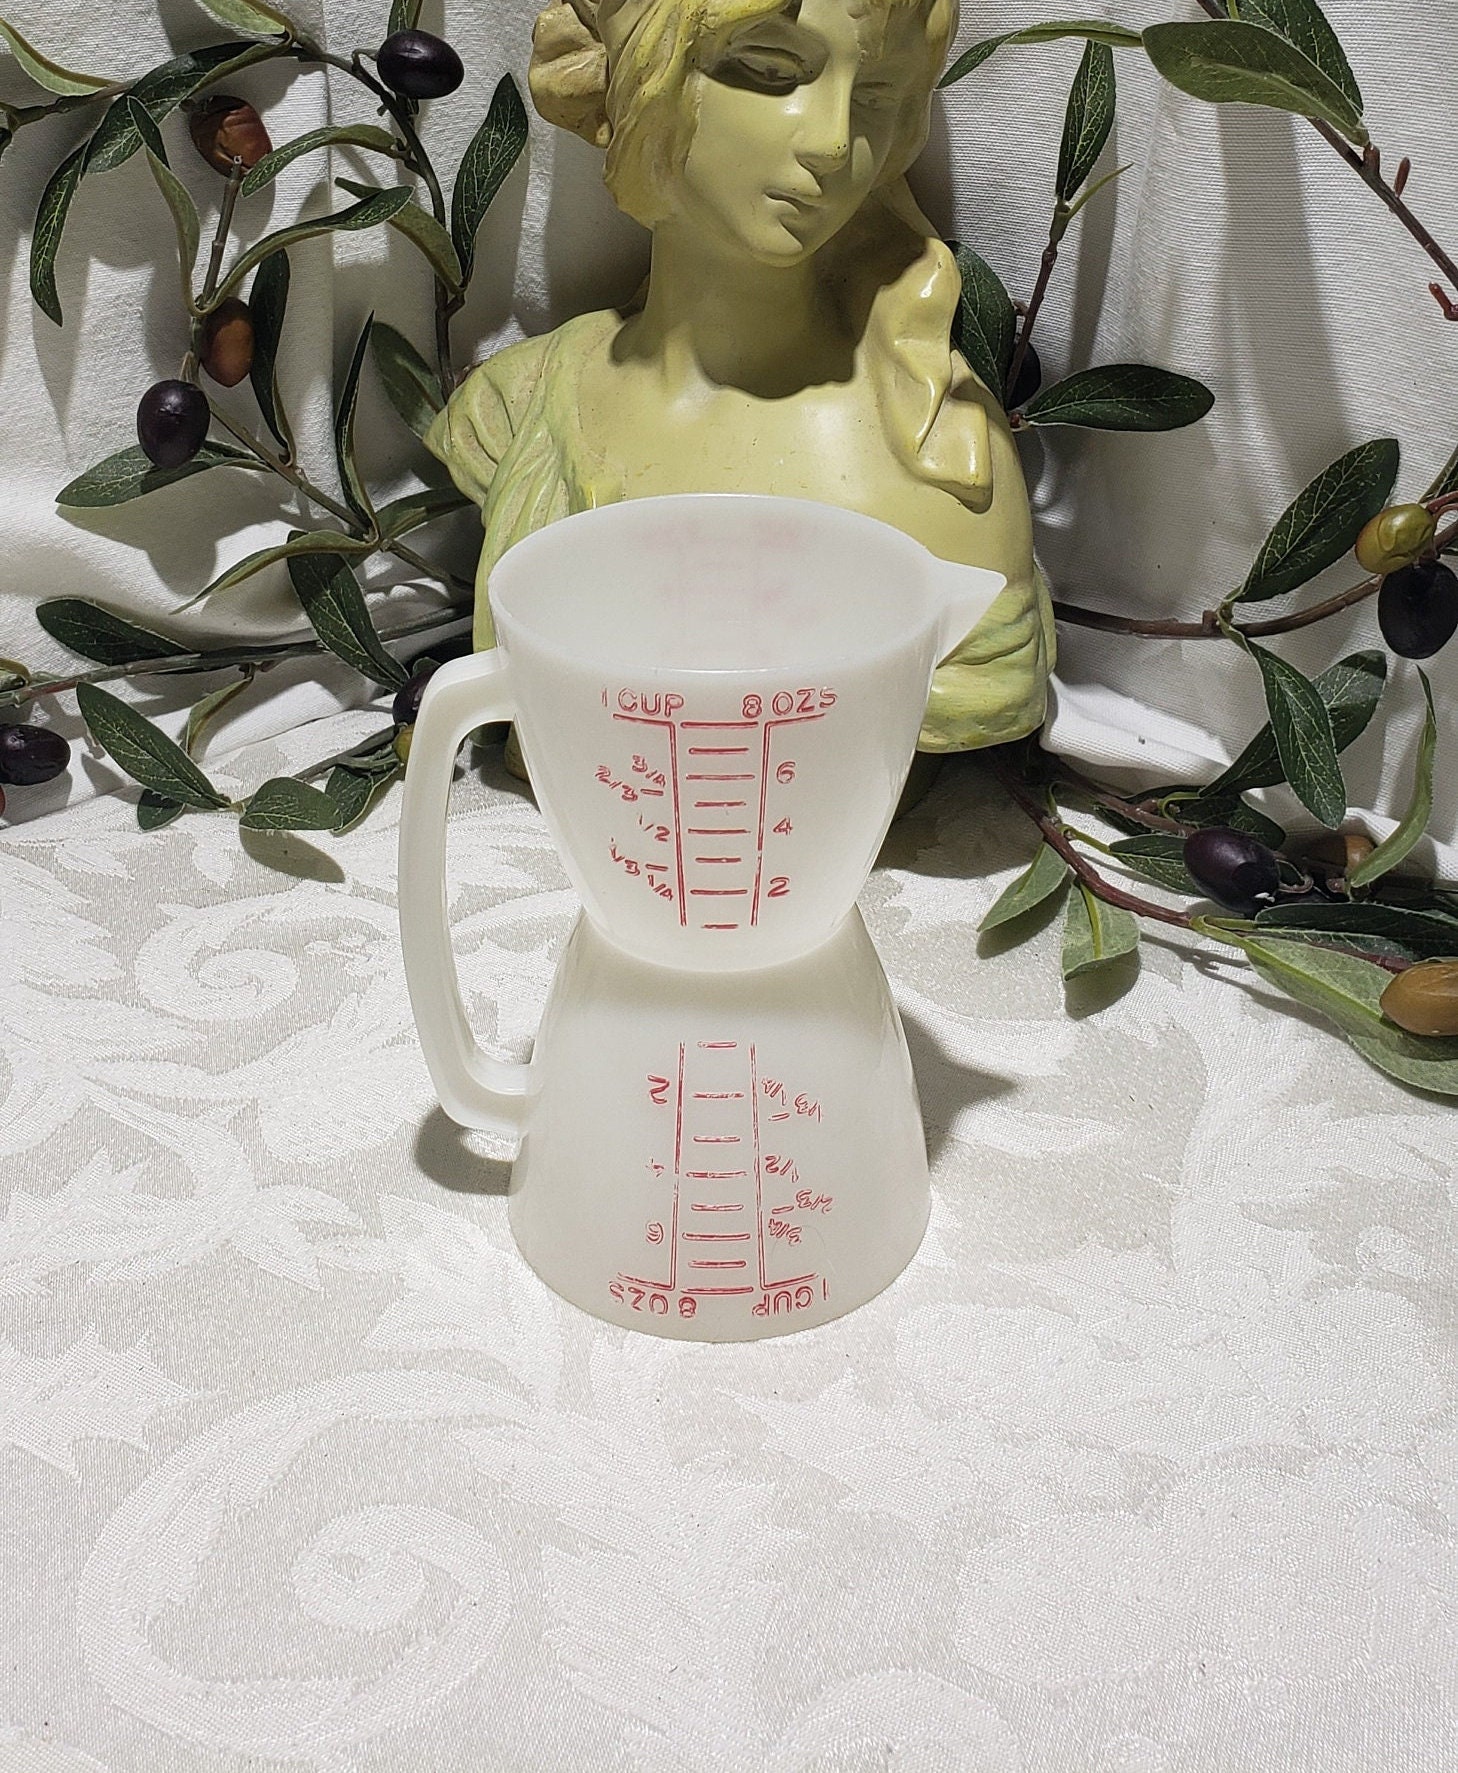 Vintage Tupperware measuring cups - The Woodlands Texas Home Accessories  For Sale - Kitchen / Dining Classifieds on Woodlands Online